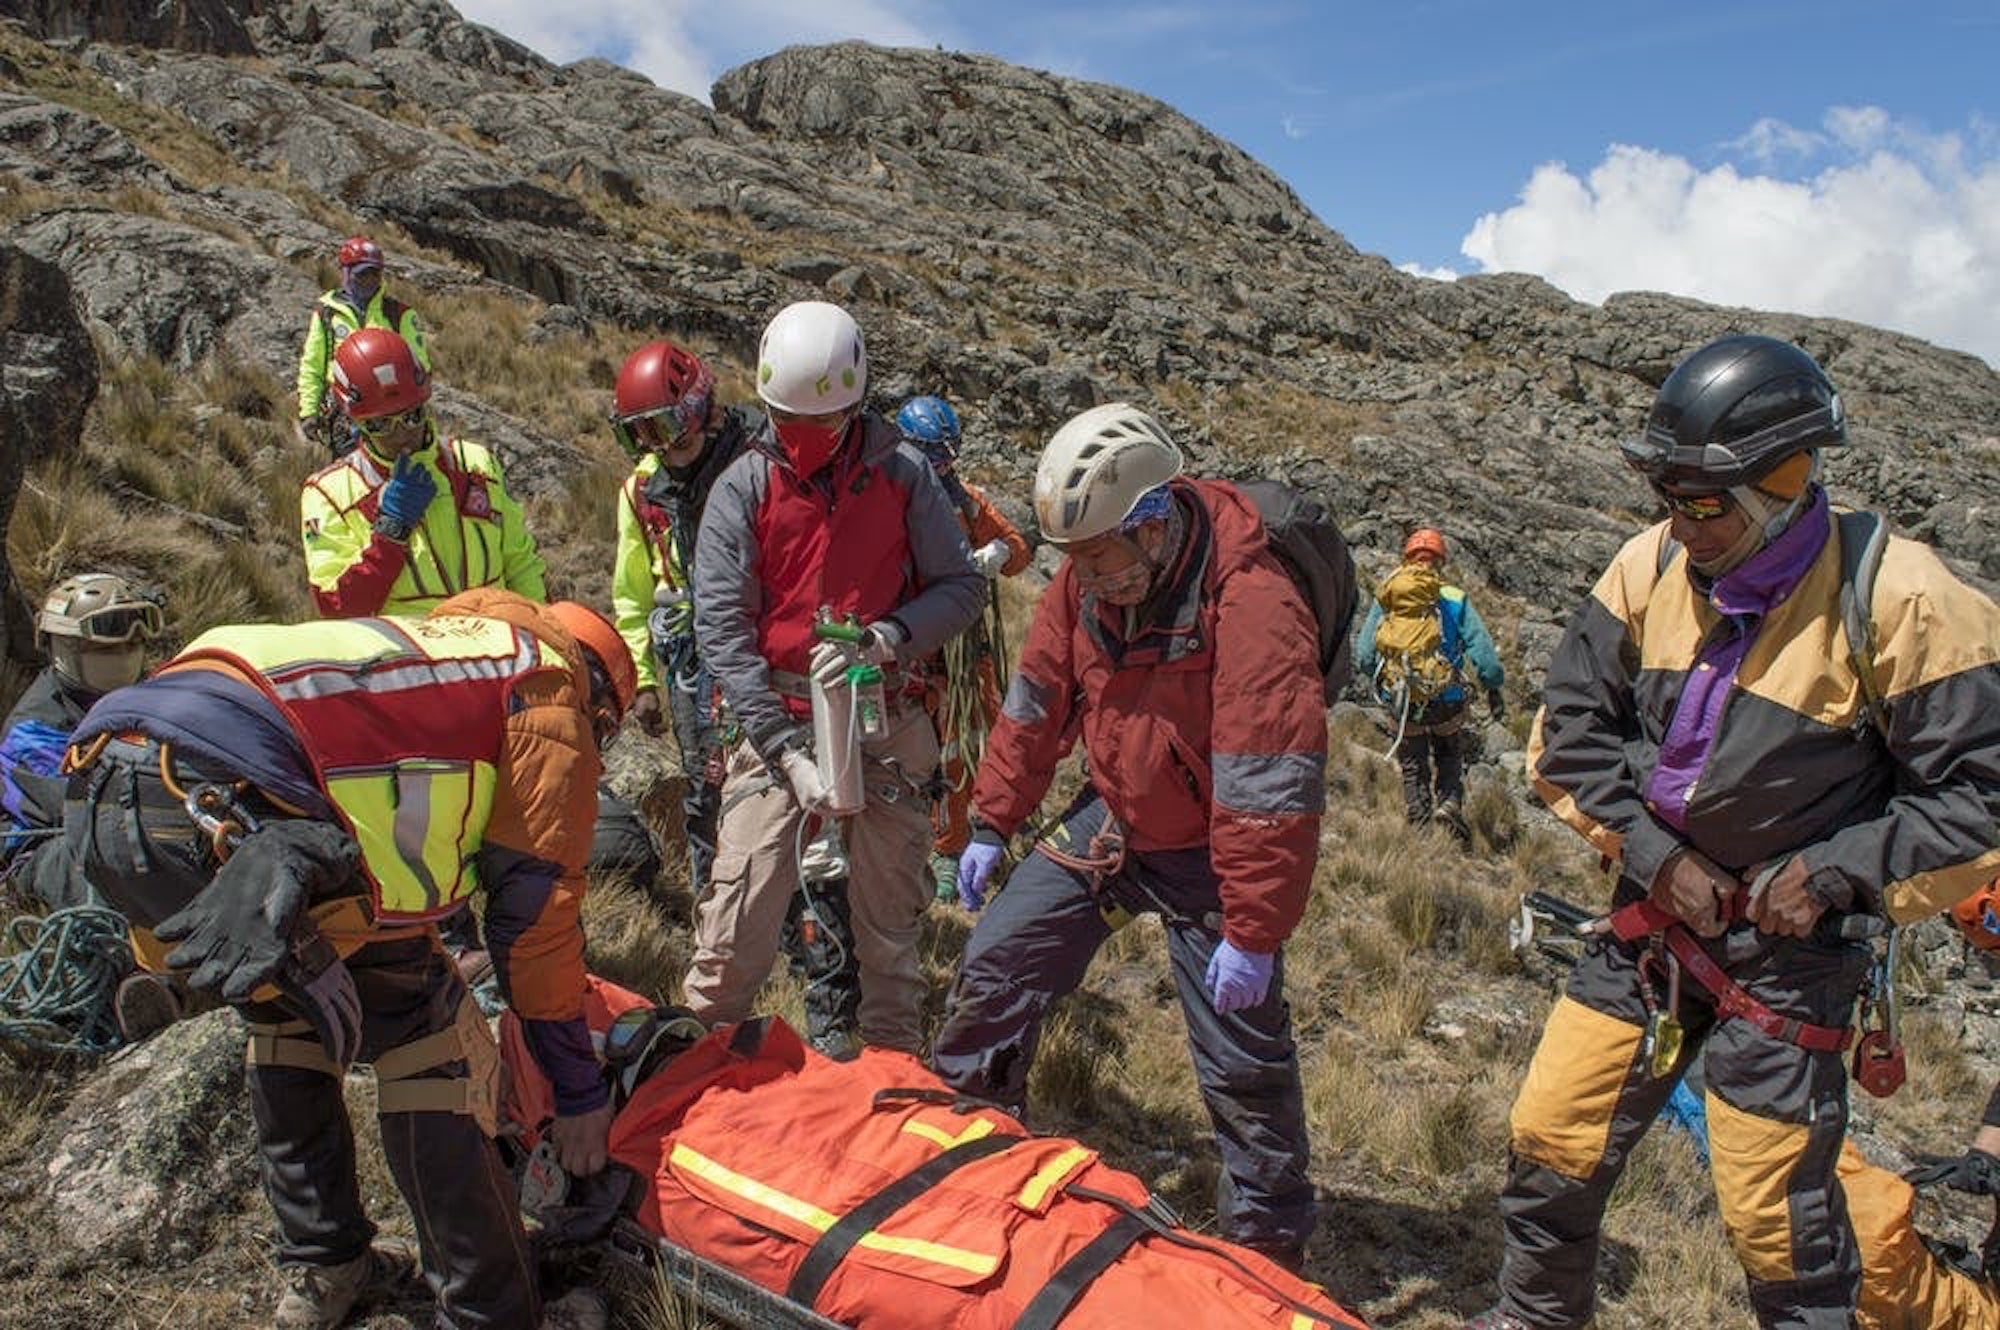 Group of first responders with gear training with an orange body bag on a rocky mountain slope